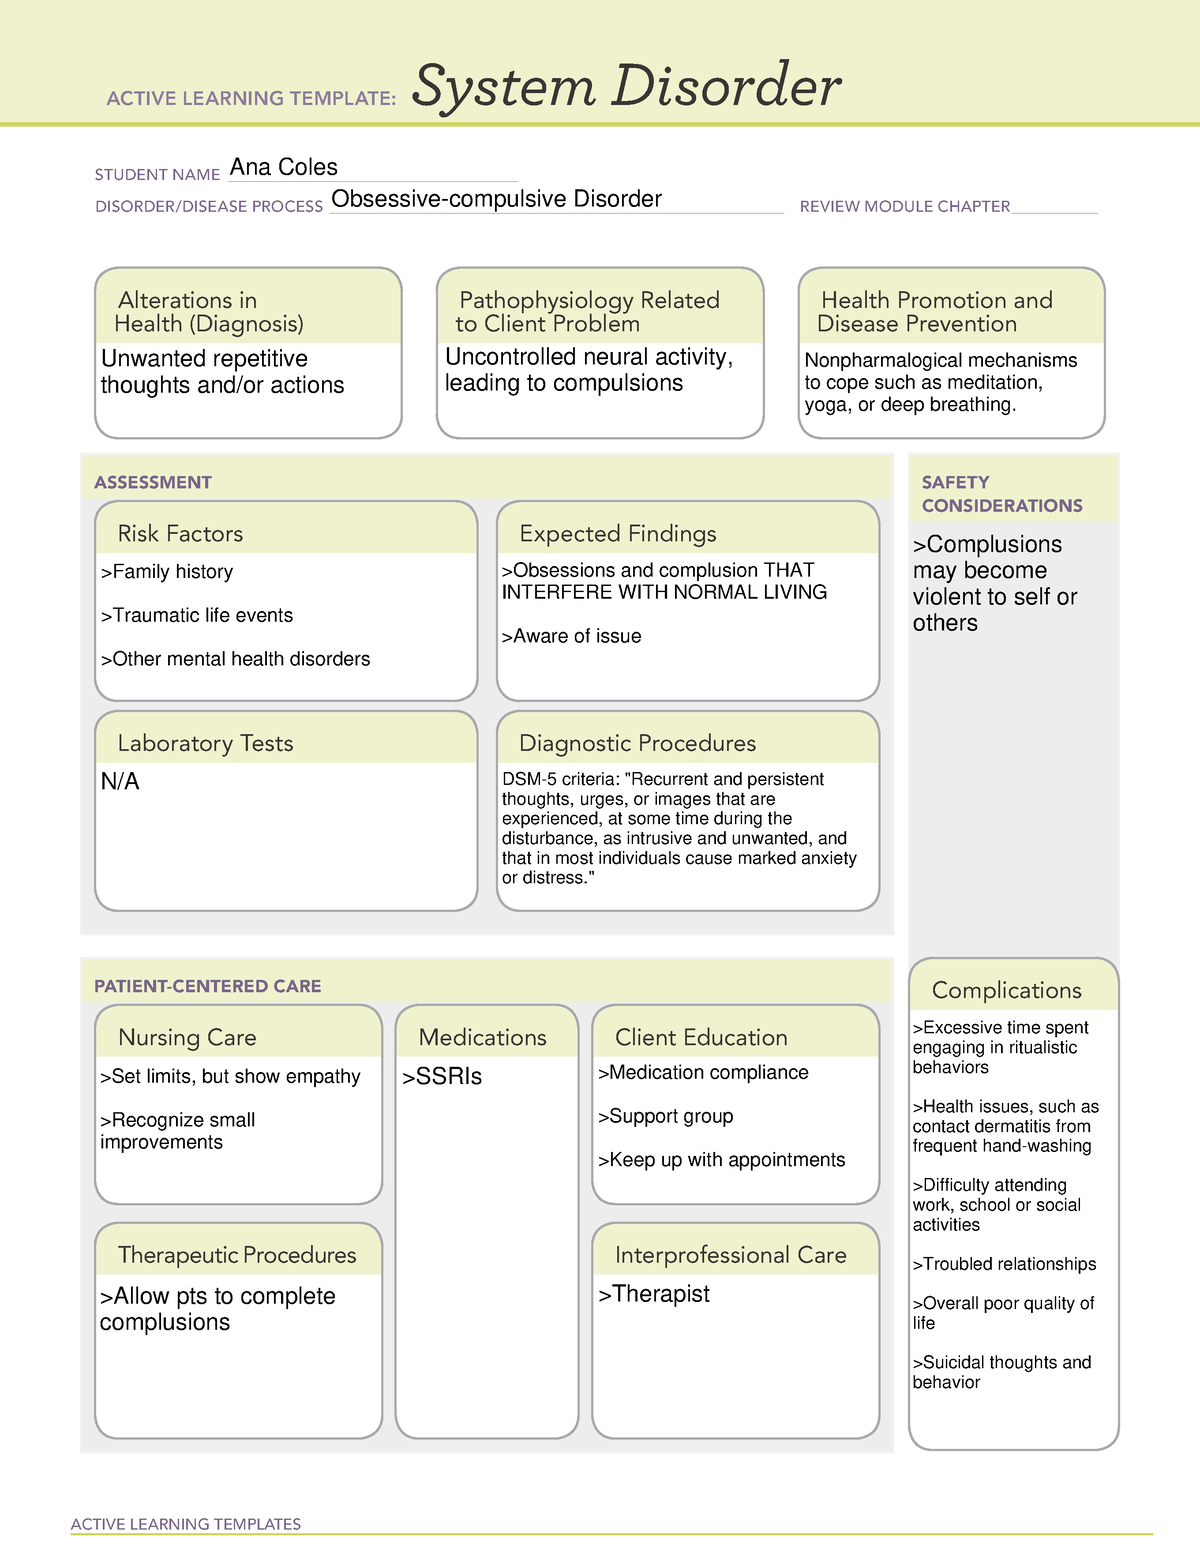 System Disorder OCD OCD study sheet ACTIVE LEARNING TEMPLATES